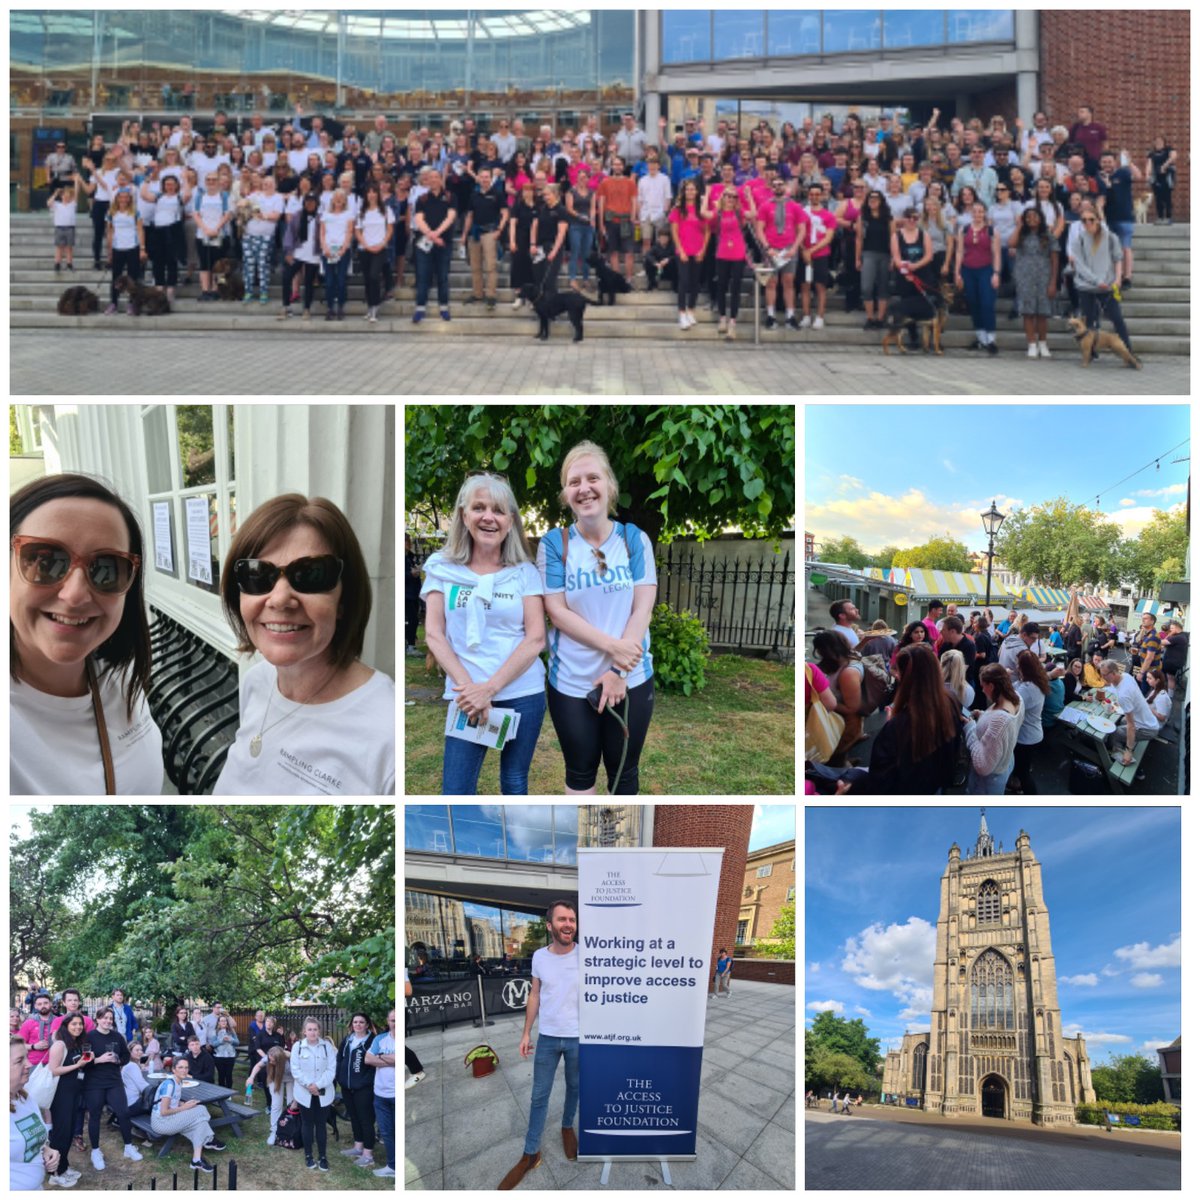 What an amazing sight - 200+ lawyers walking and raising funds for #accesstojustice - Well done to all that took part and thanks to @NNLawSociety and @RamplingClarke for supporting and sponsoring this great event 👏 #Norfolk #Norwich #legalcommunity